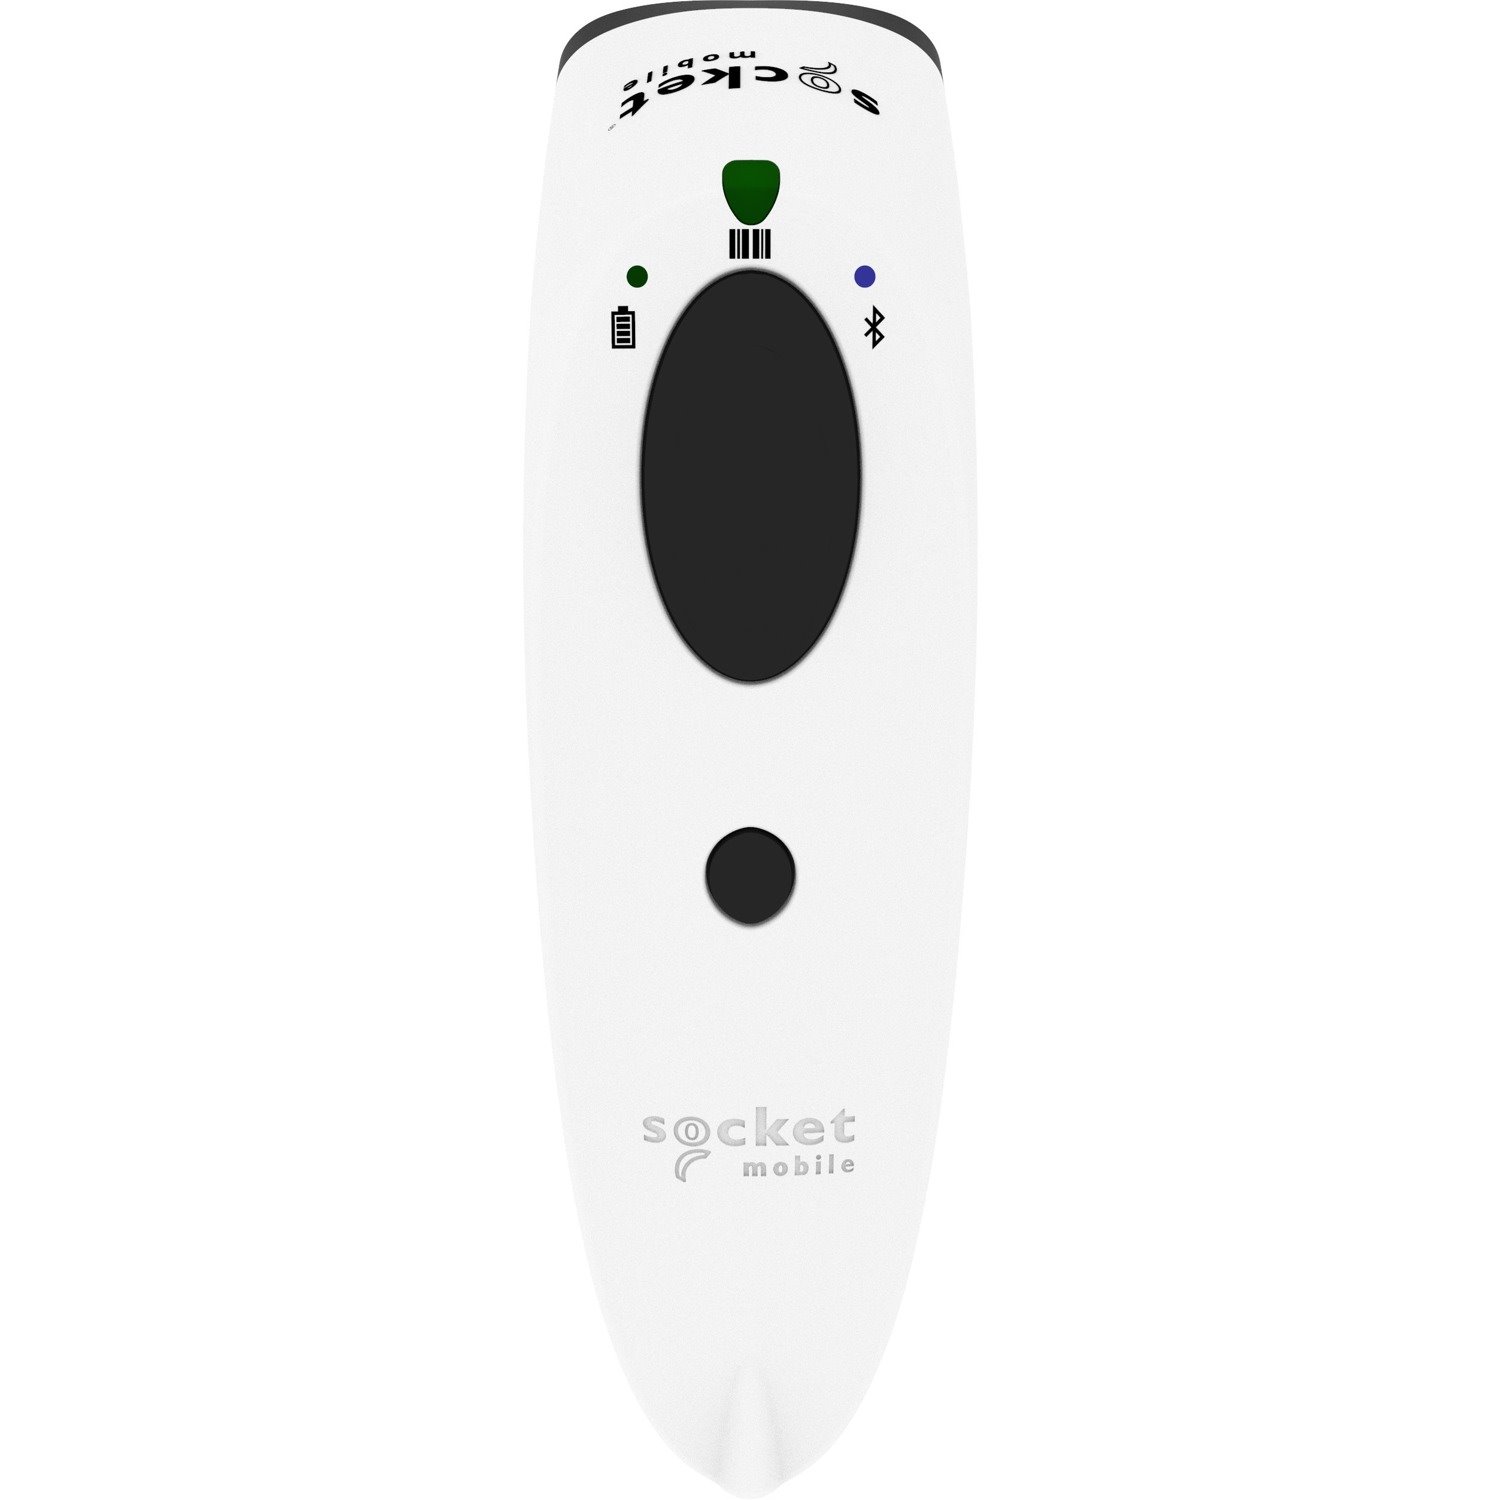 Socket Mobile SocketScan S720 Asset Tracking, Loyalty Program, Transportation, Inventory, Ticketing, Delivery, Hospitality Handheld Barcode Scanner - Wireless Connectivity - White